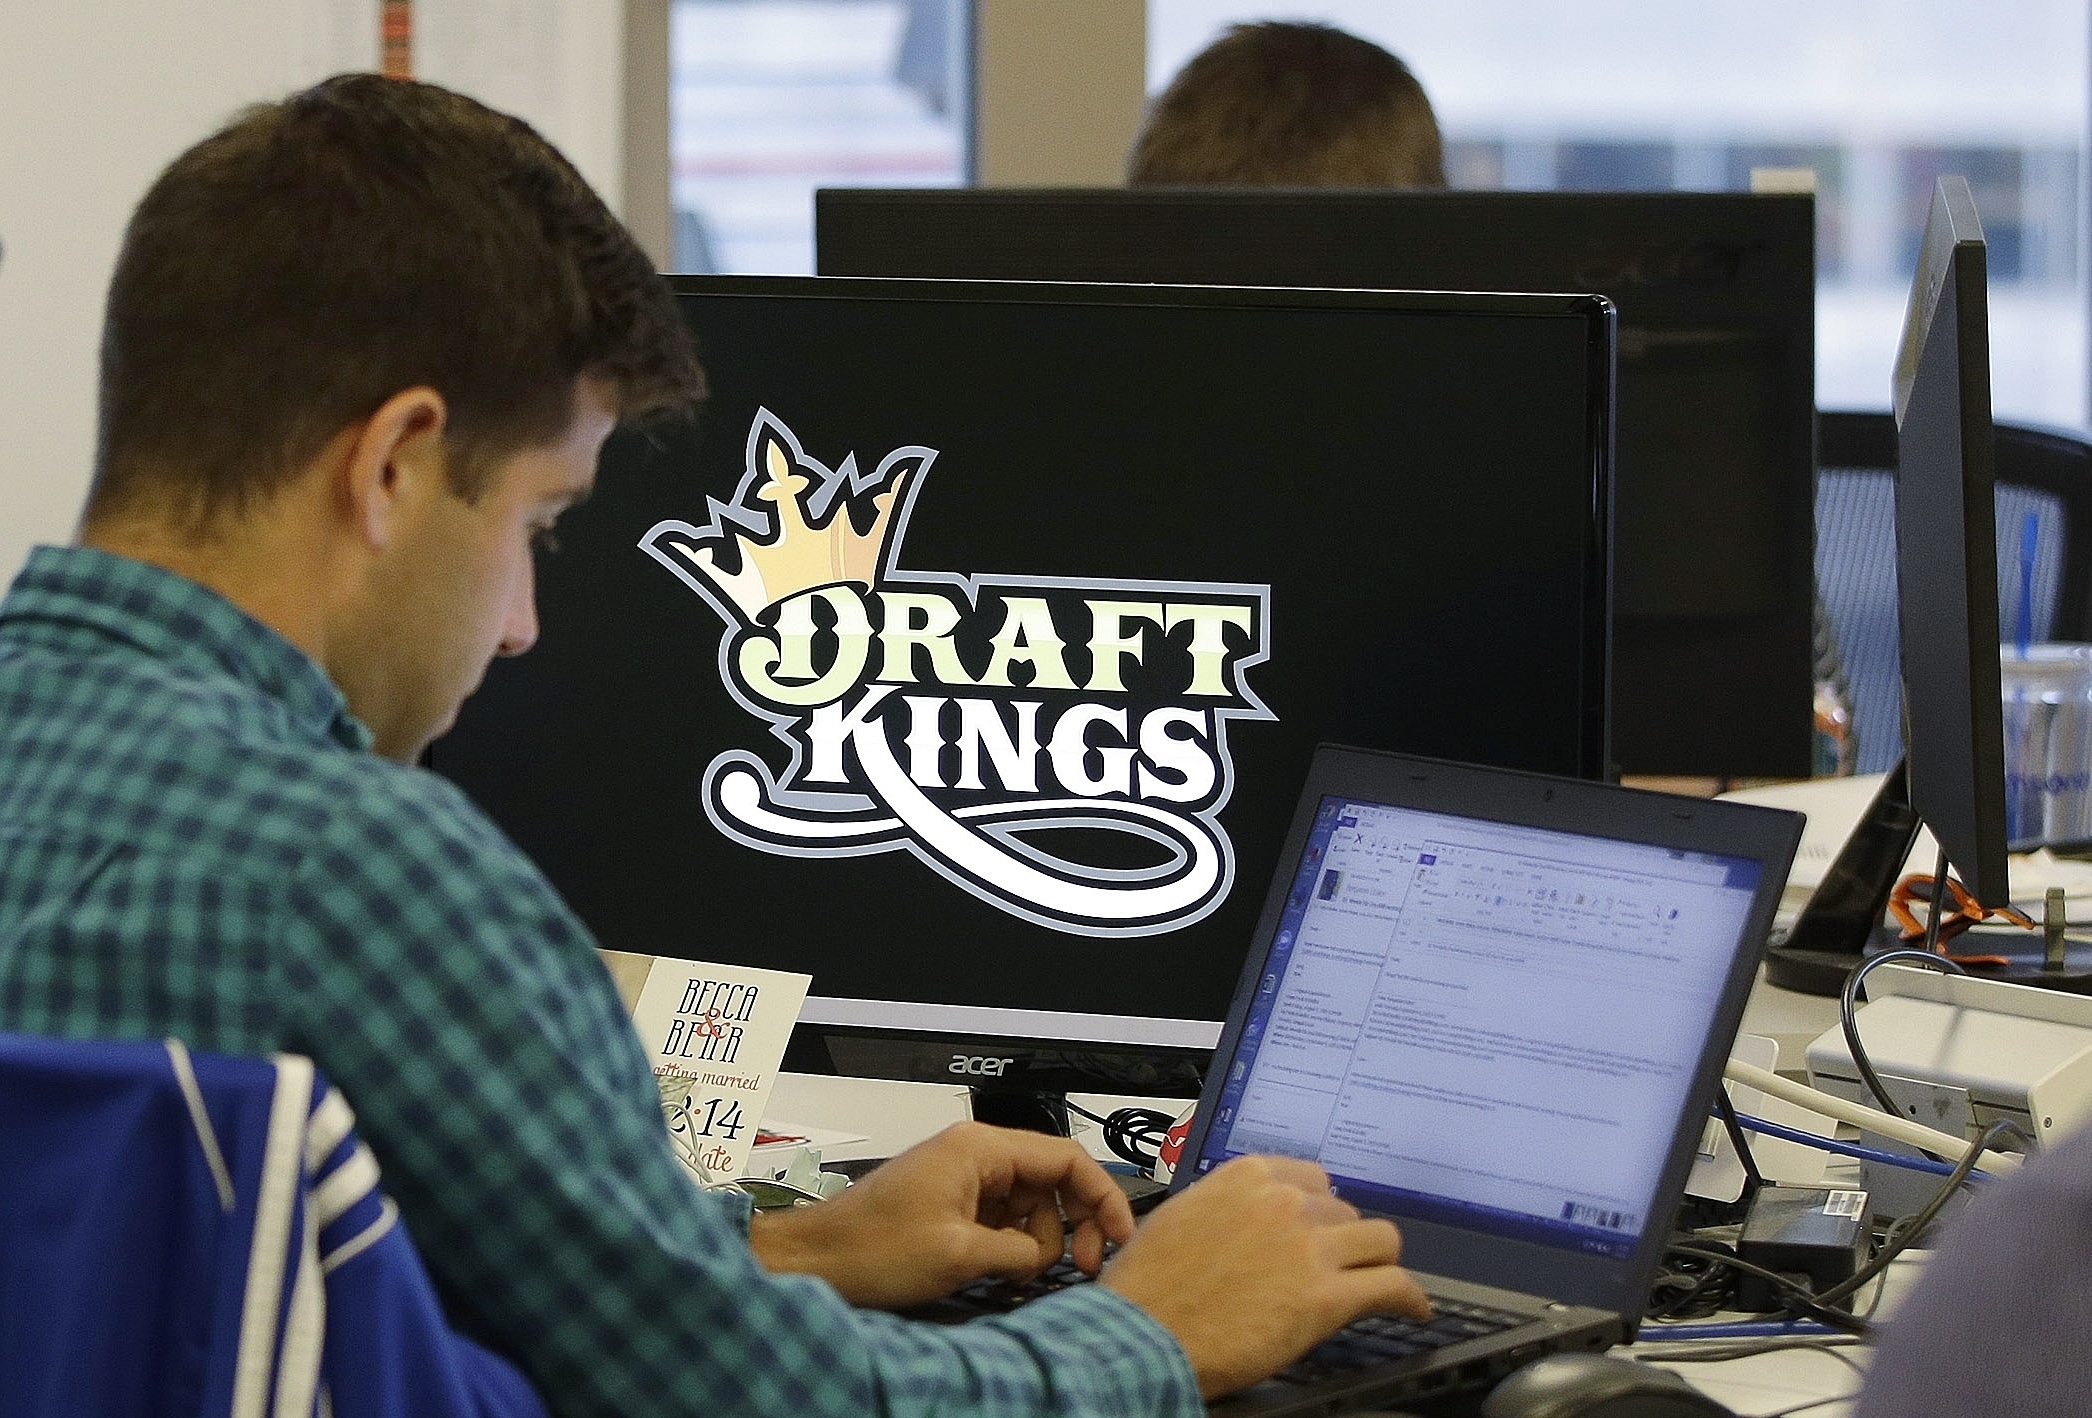 Computer screen with Draft Kings logo